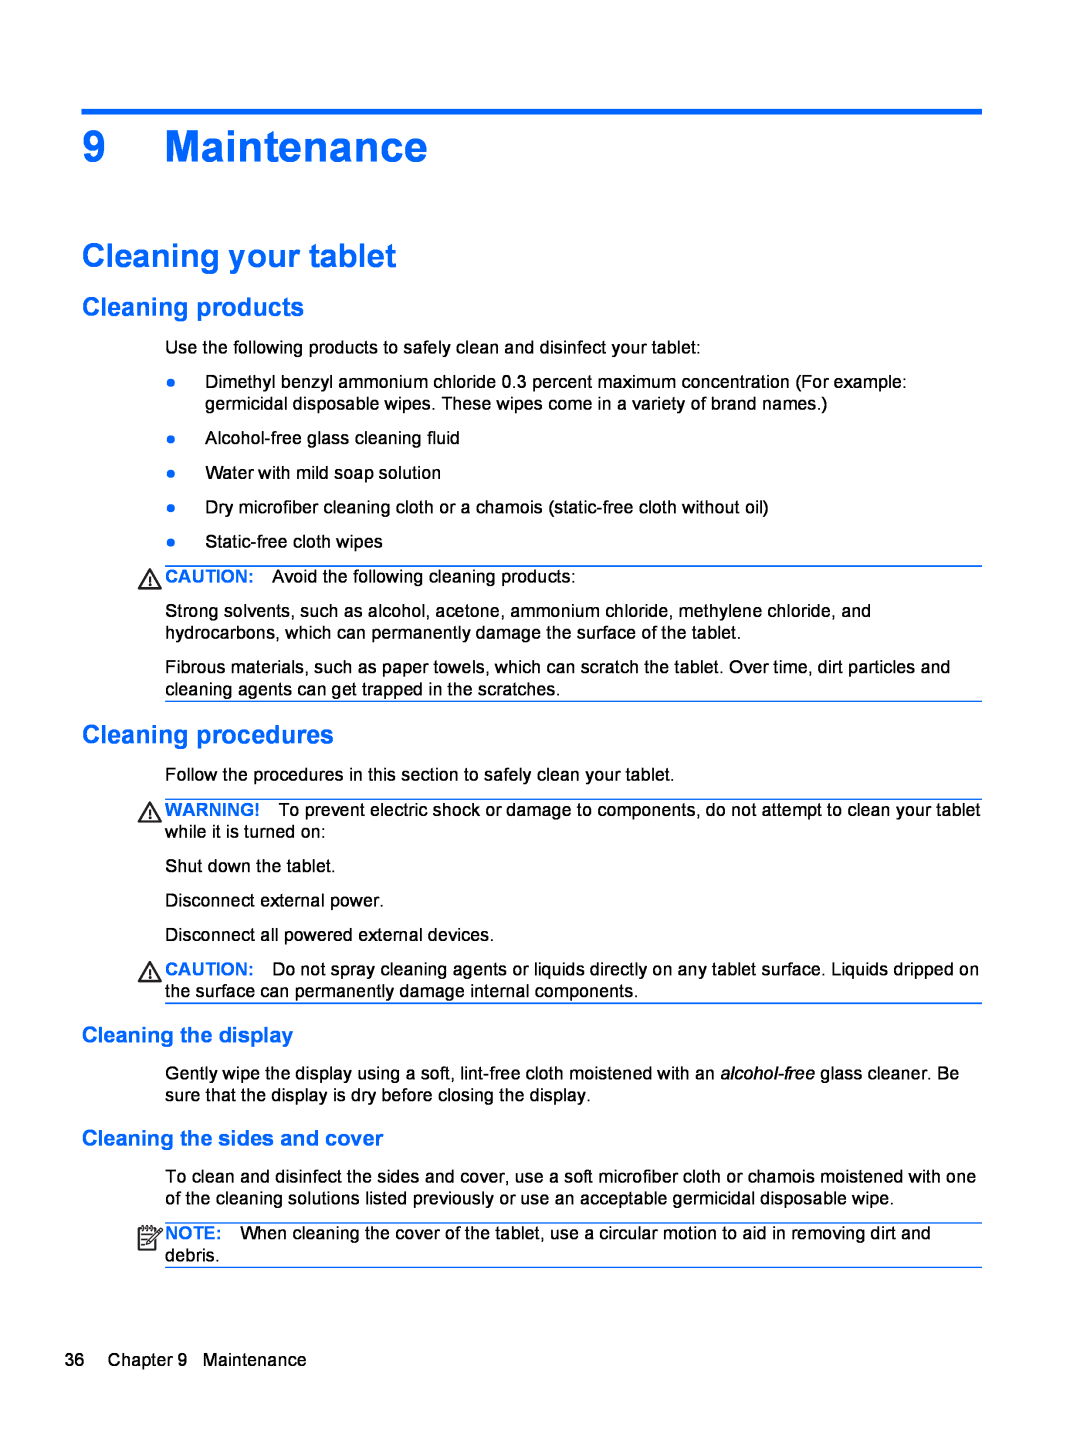 HP 900 G1 D3H87UT manual Maintenance, Cleaning your tablet, Cleaning products, Cleaning procedures, Cleaning the display 